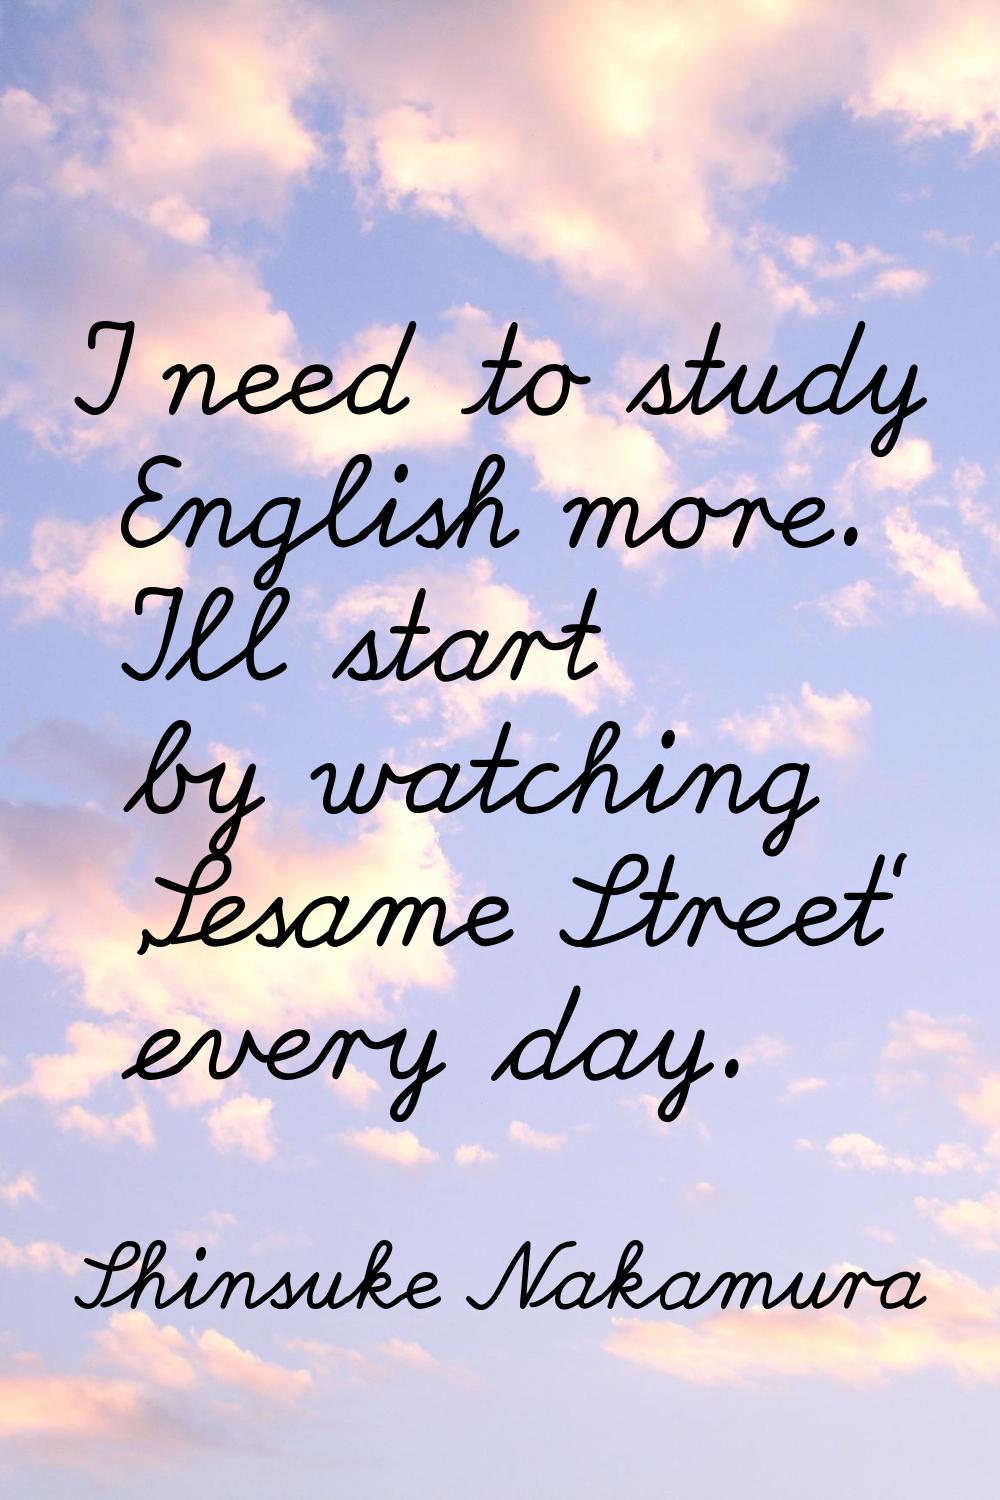 I need to study English more. I'll start by watching 'Sesame Street' every day.